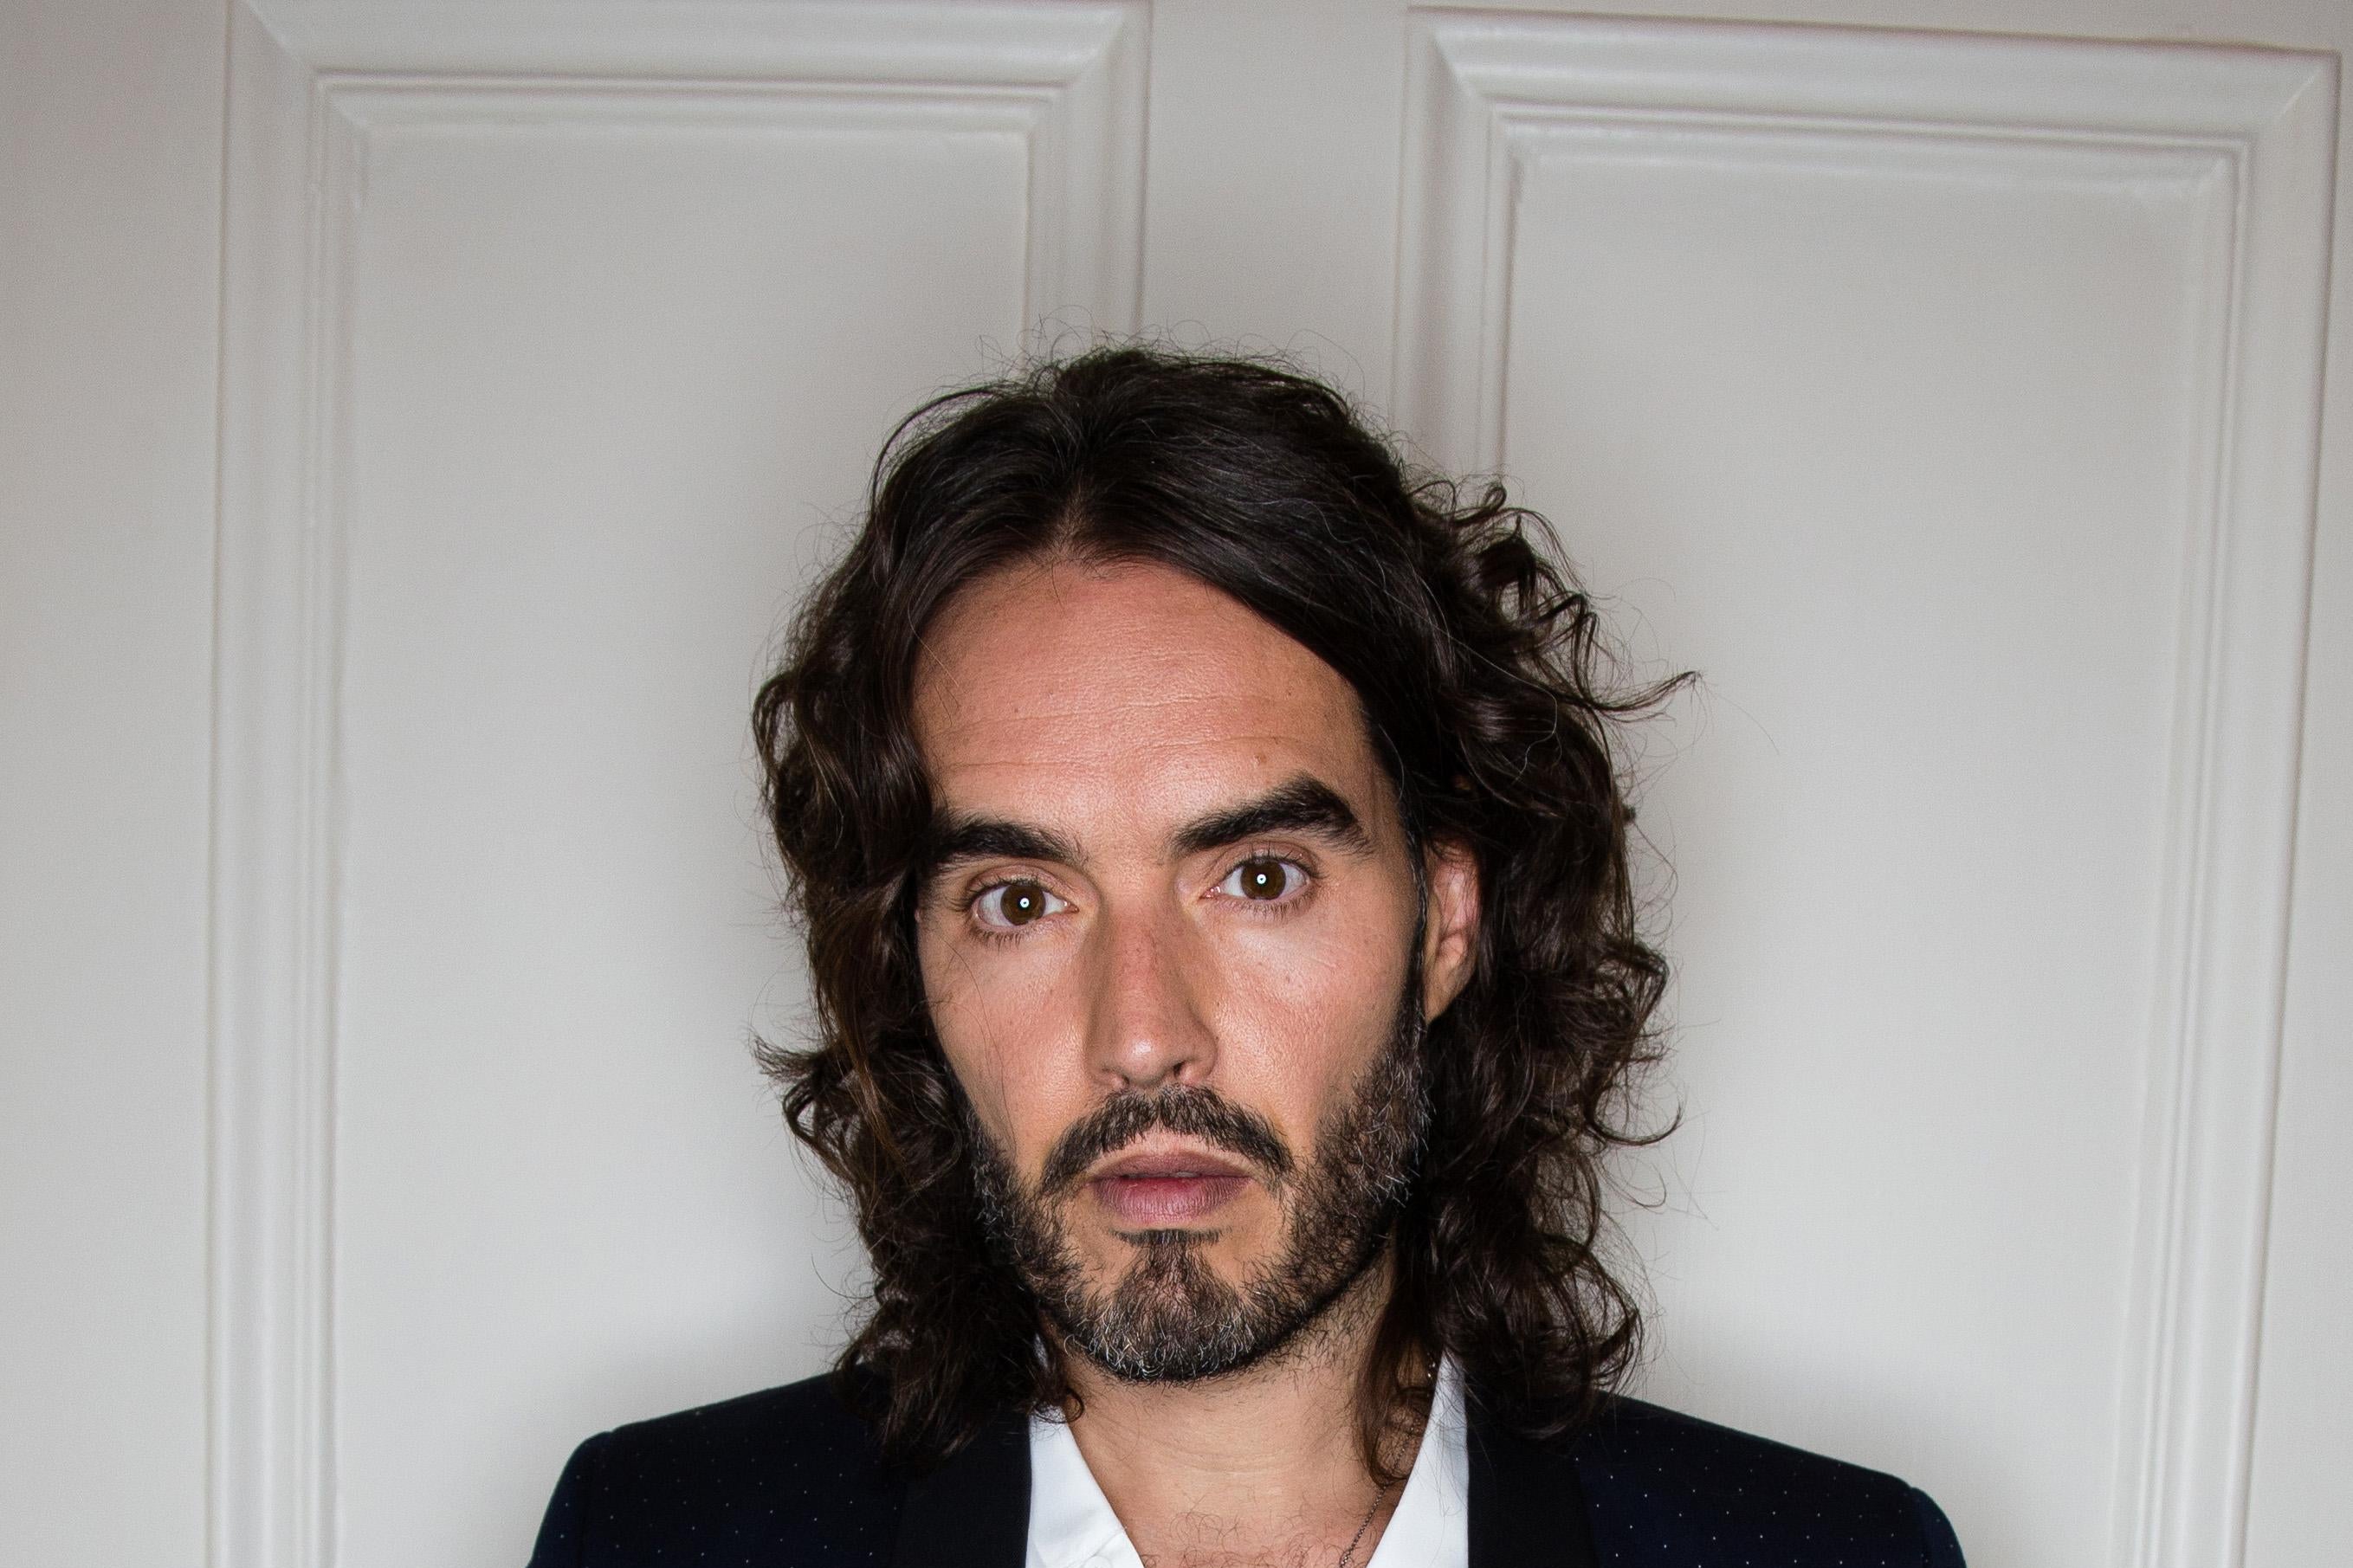 Russell Brand stands before a white wall.